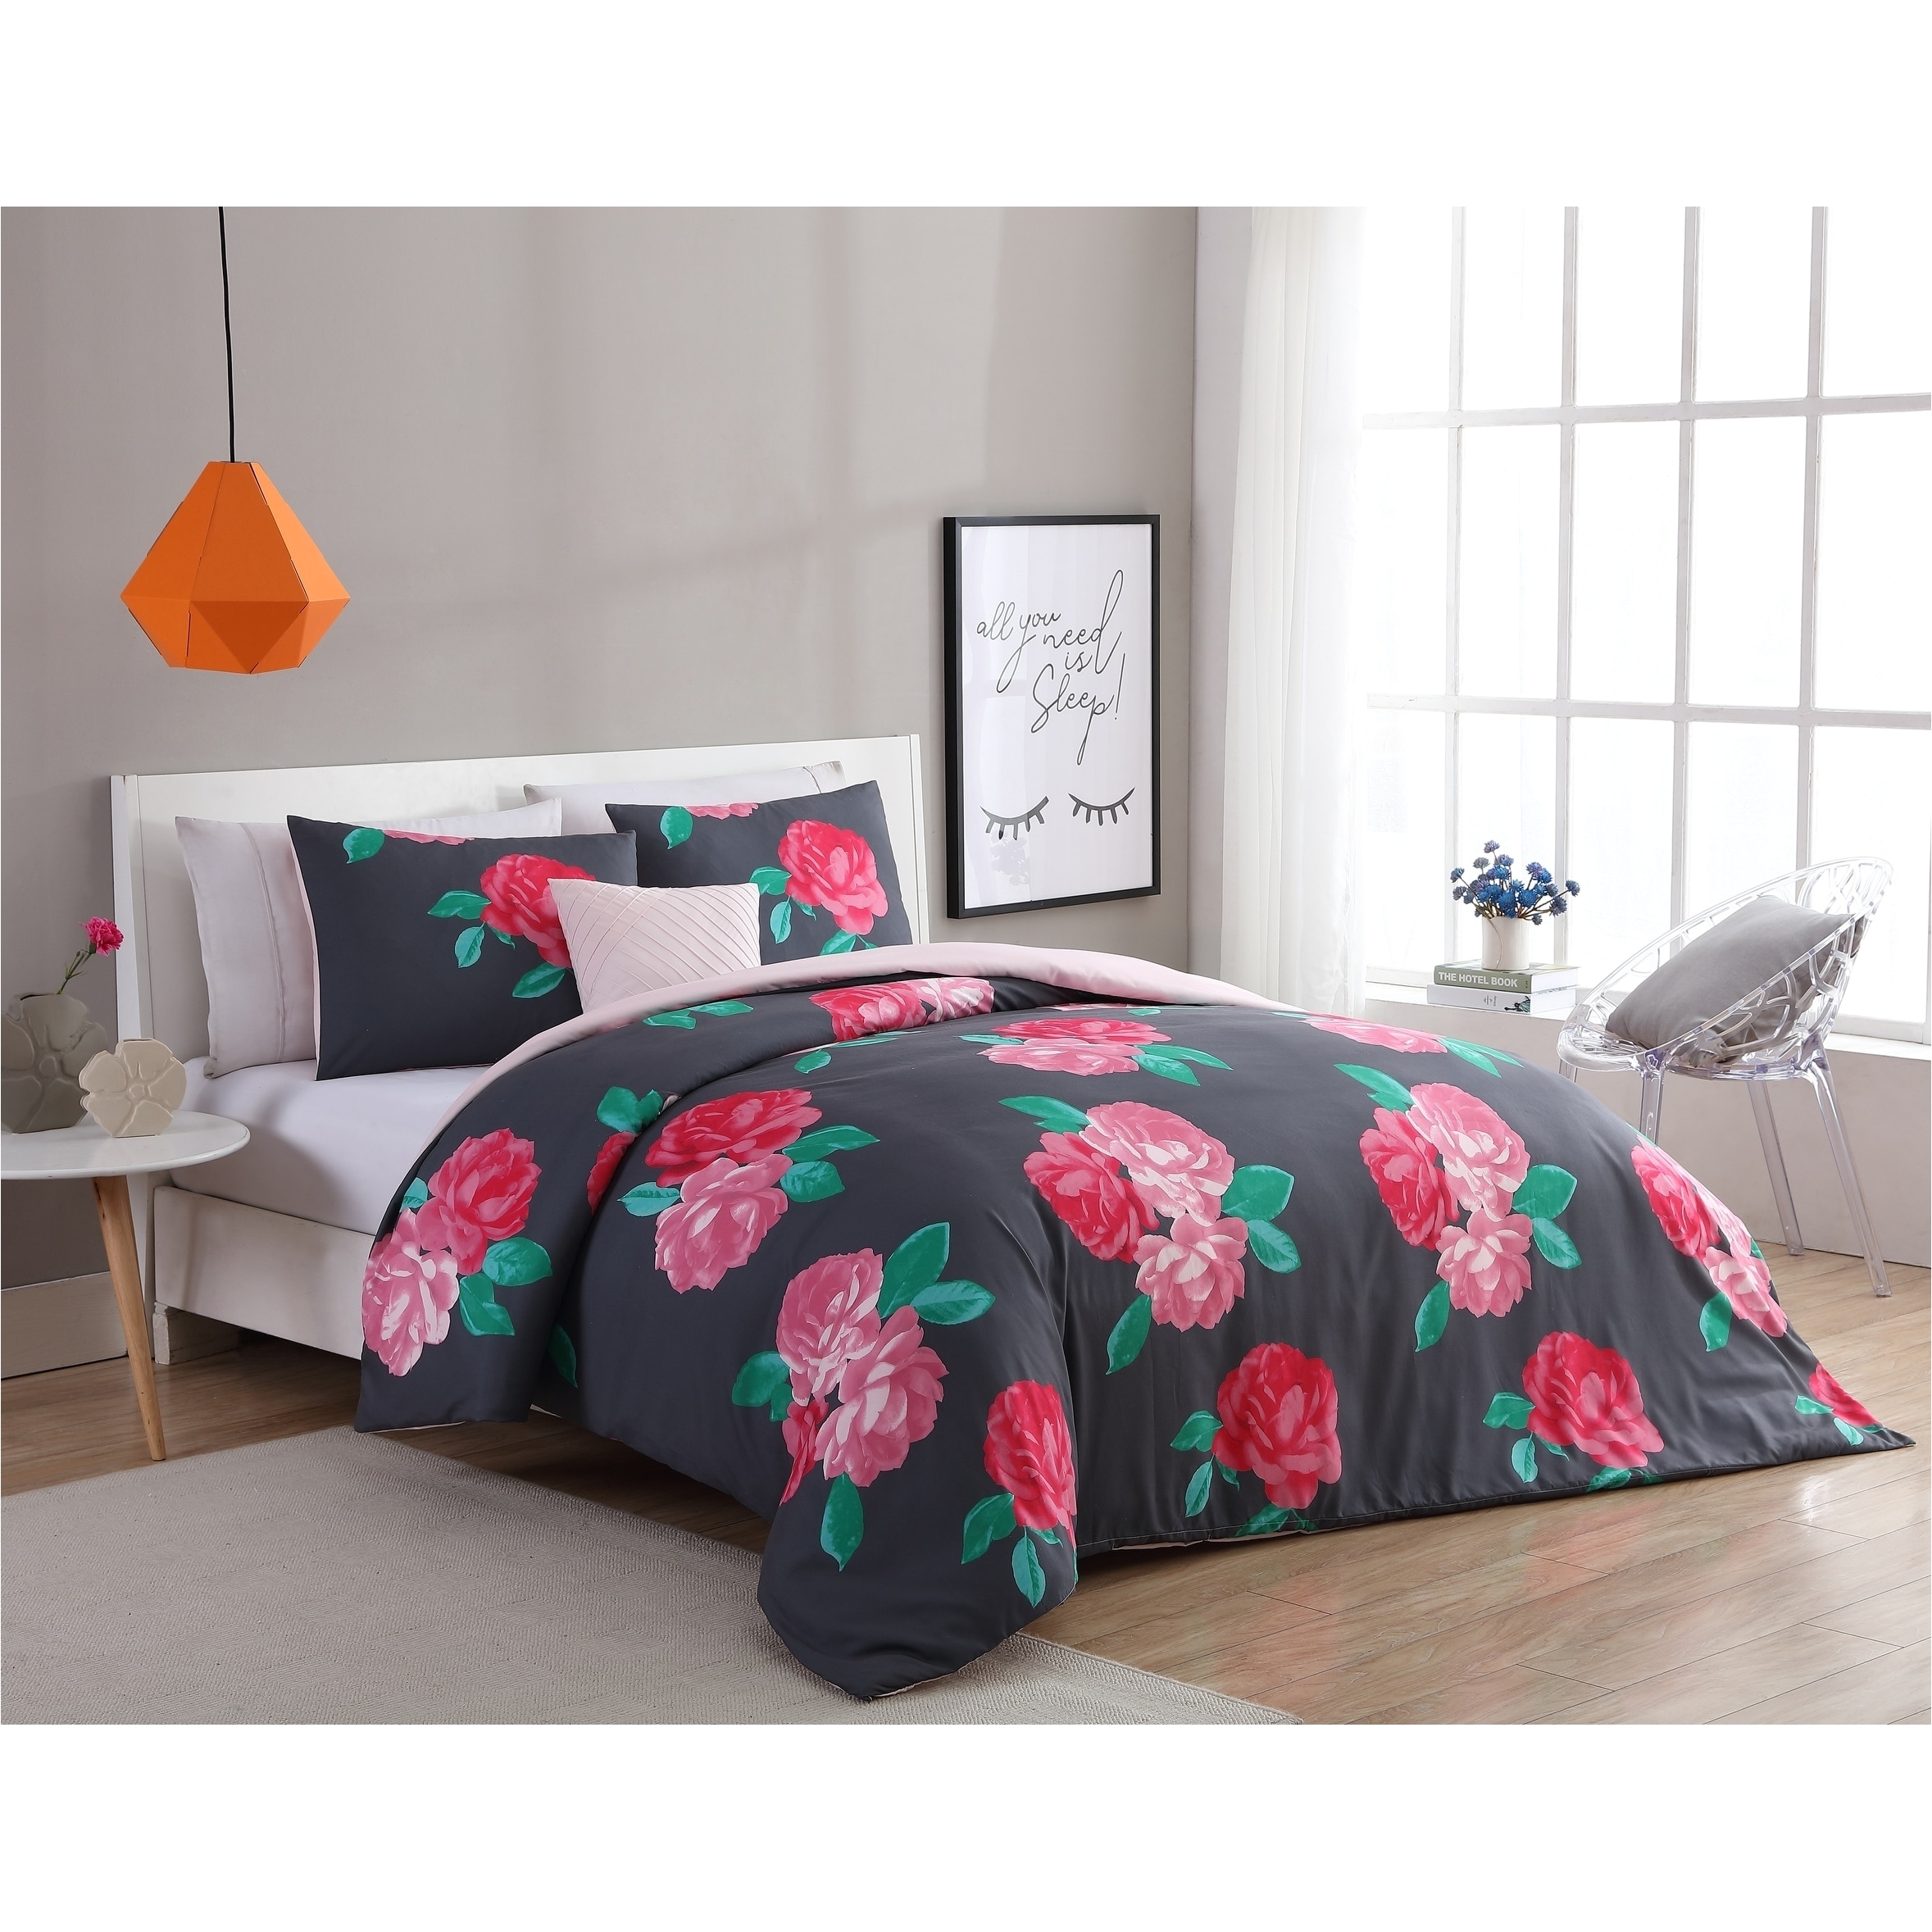 shop vcny home rosemary 4 piece comforter set free shipping today overstock com 19683722